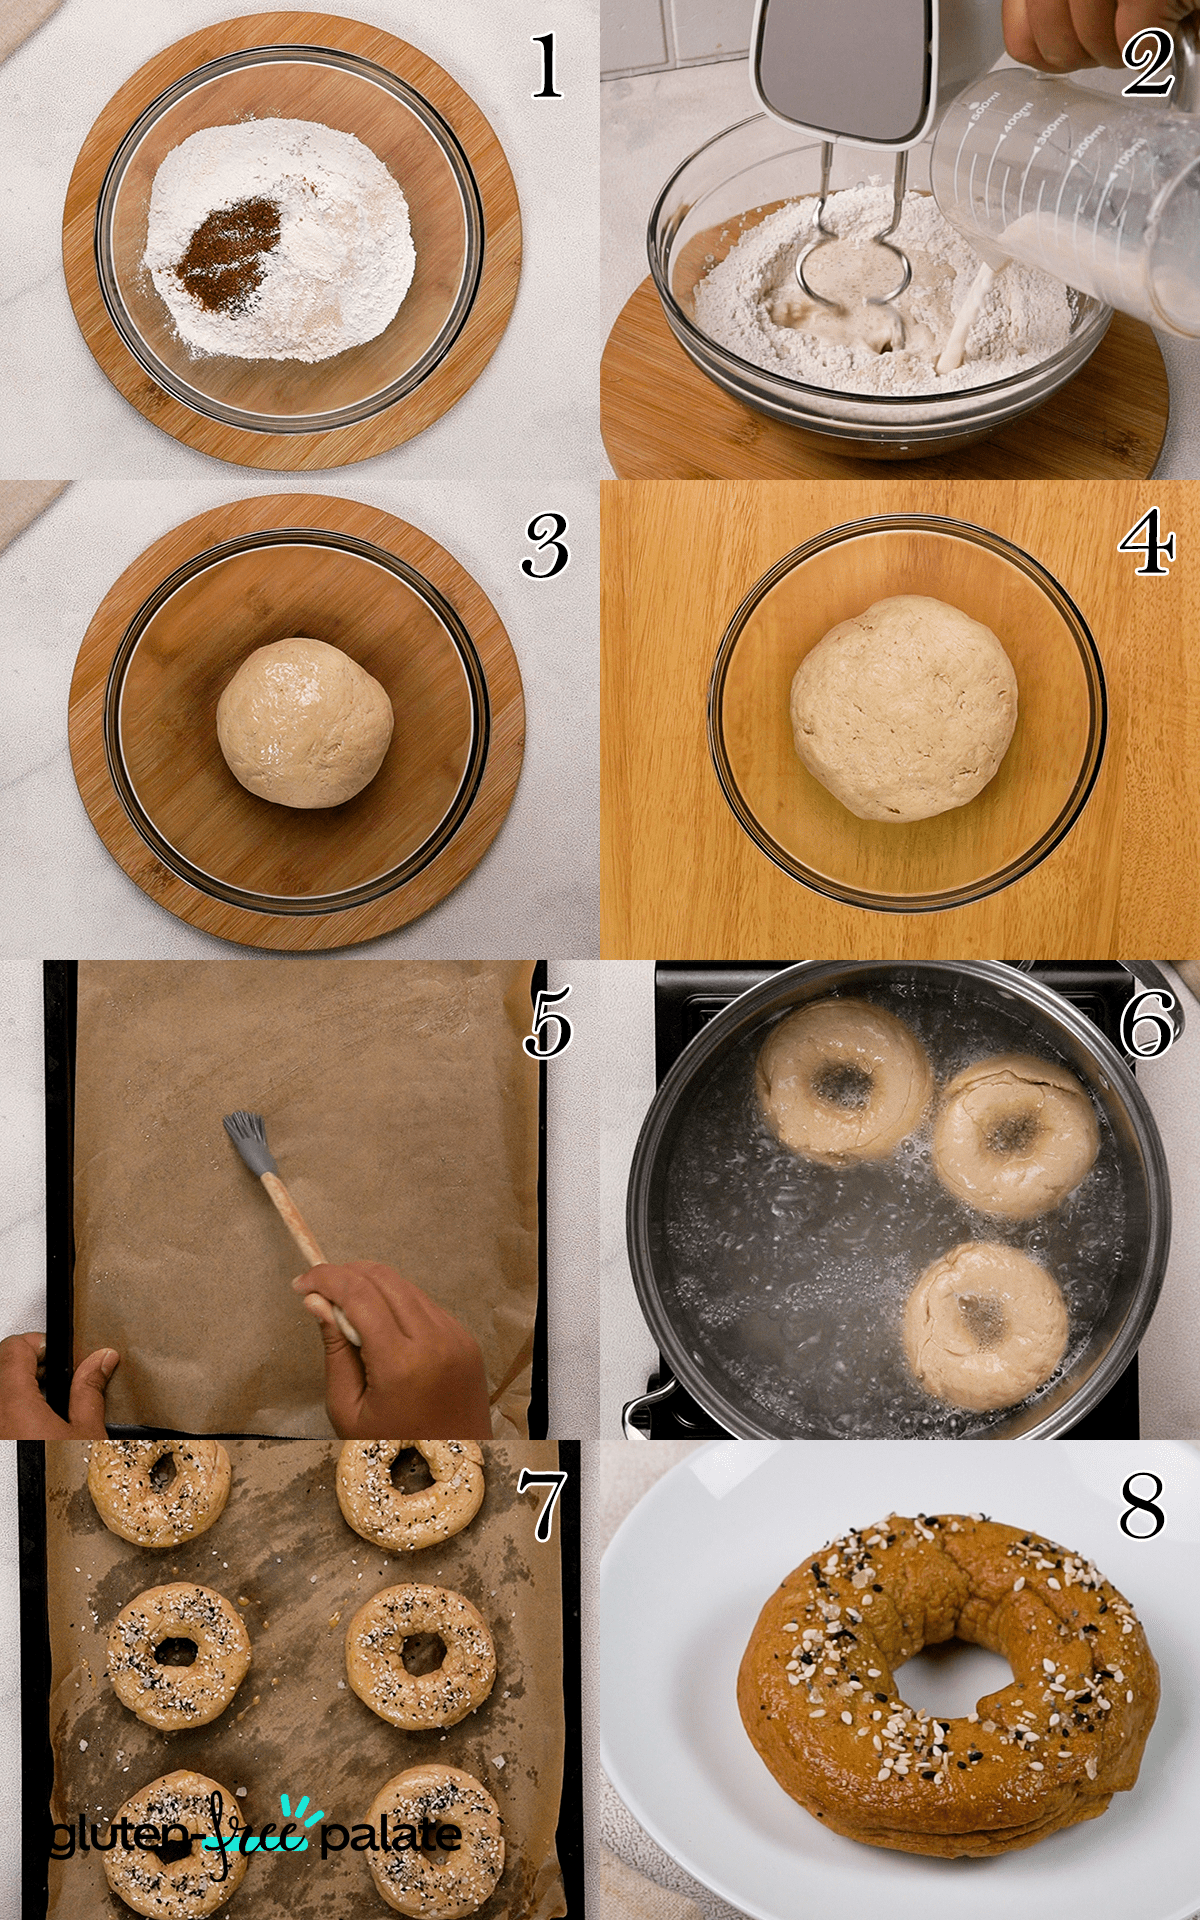 Here's my step-by-step visual guide to making gluten-free bagels.